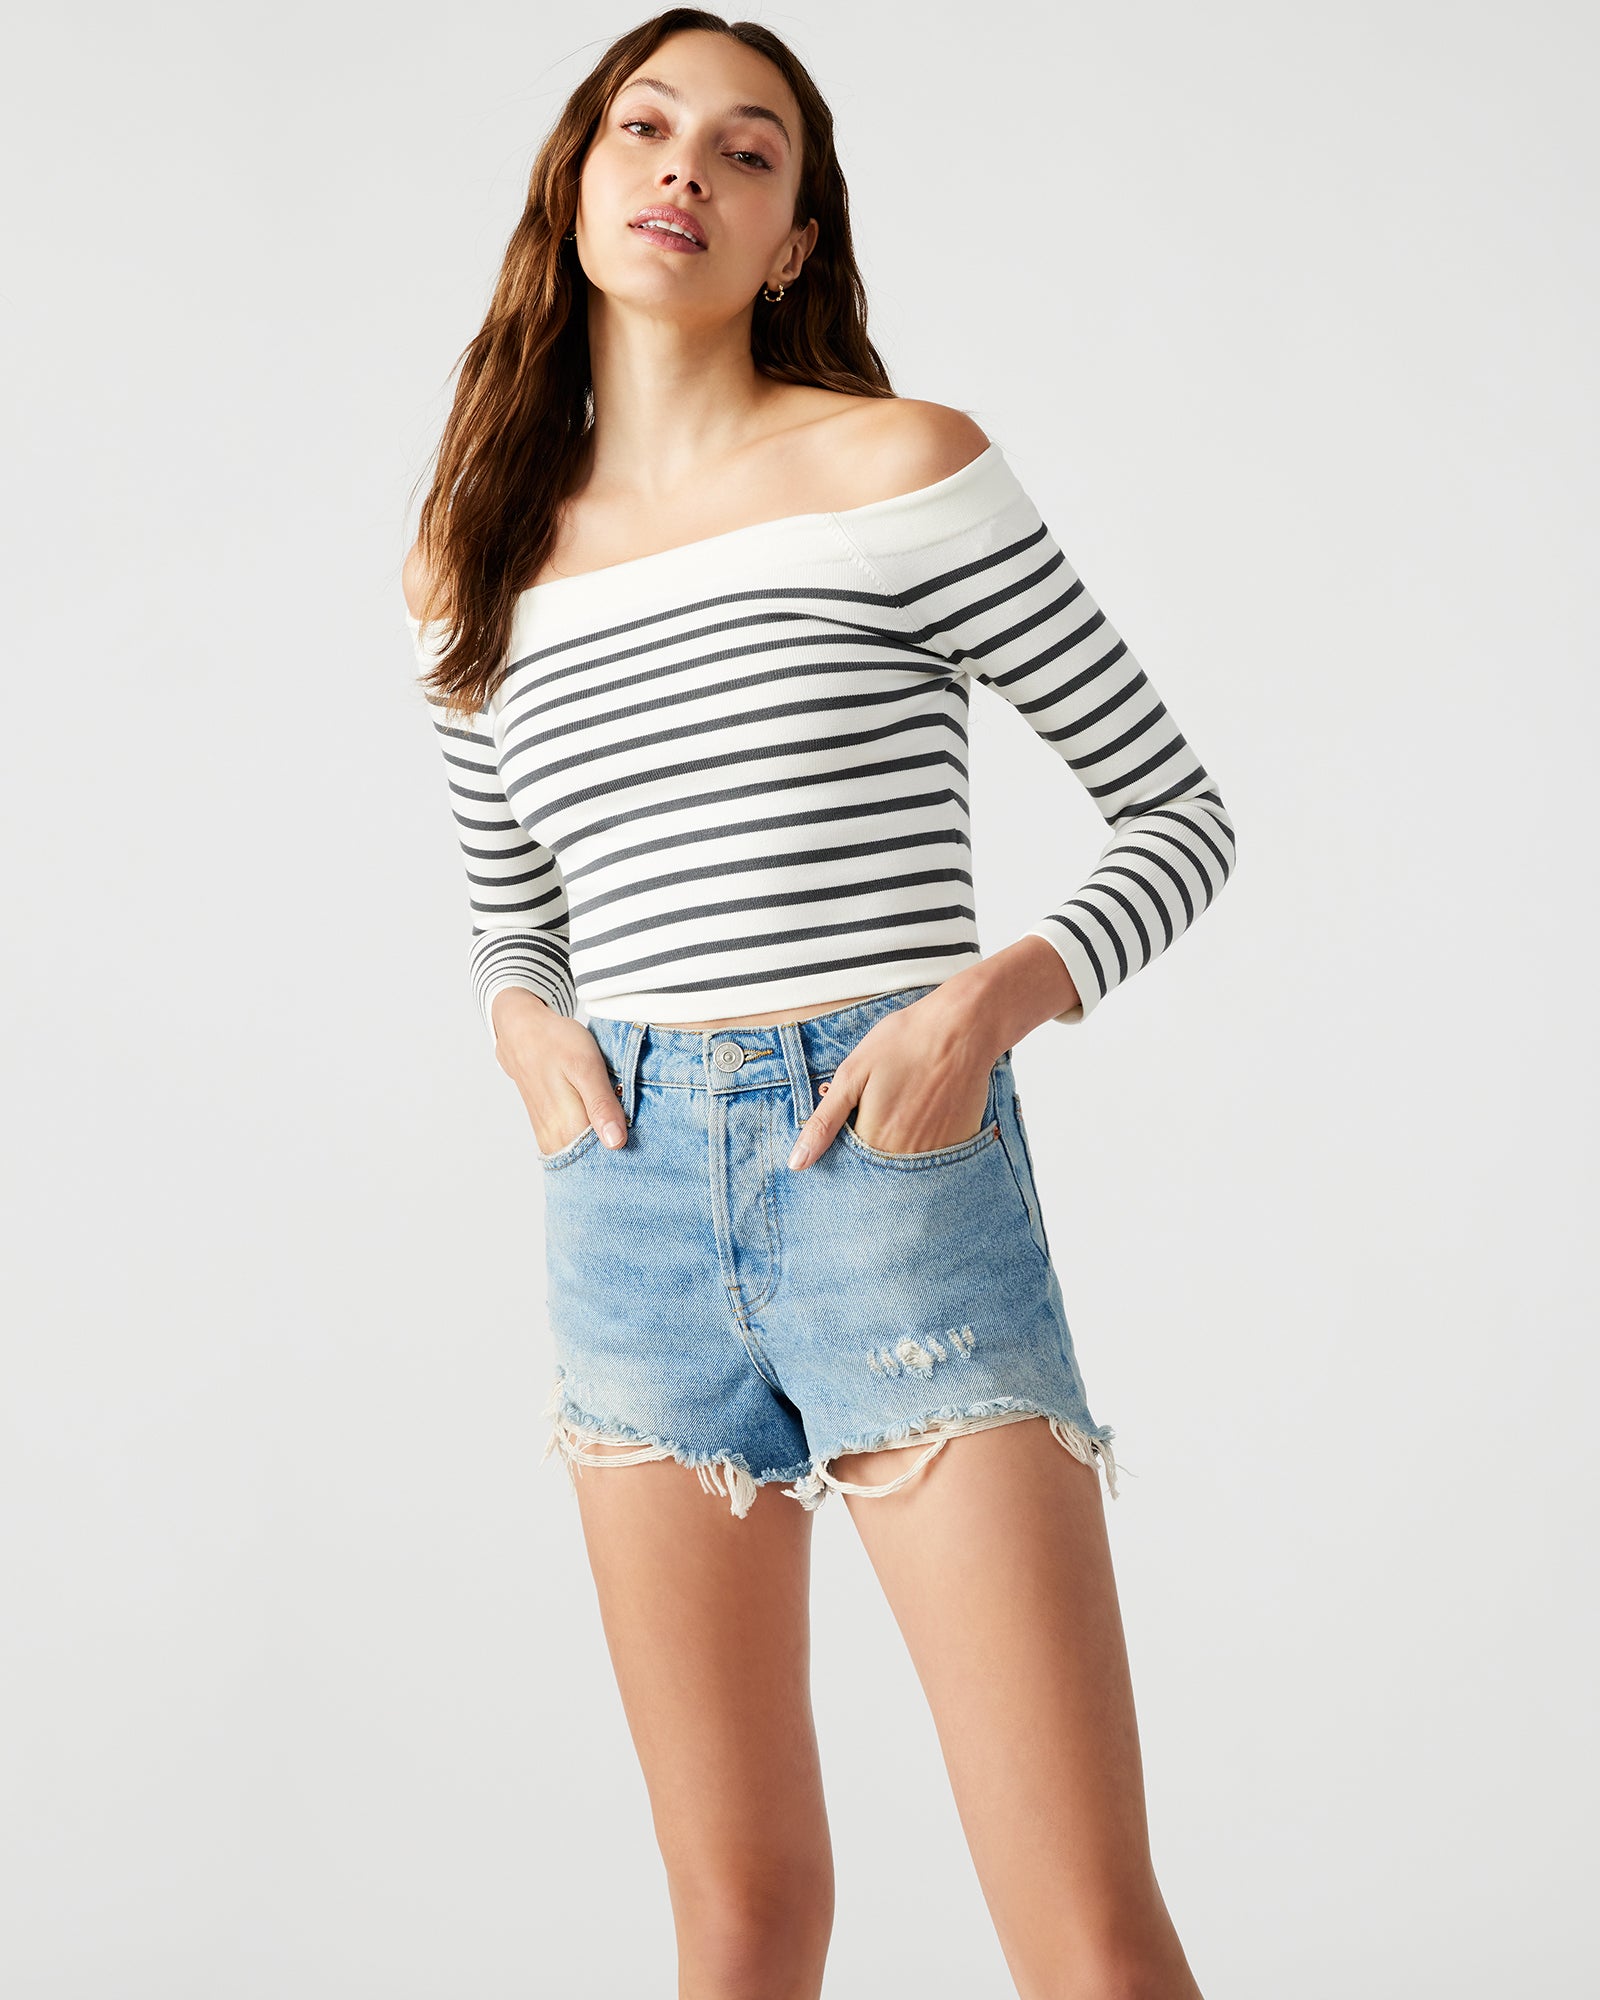 RESSI Sweater White/Black | Women's Cropped Striped Sweater Top